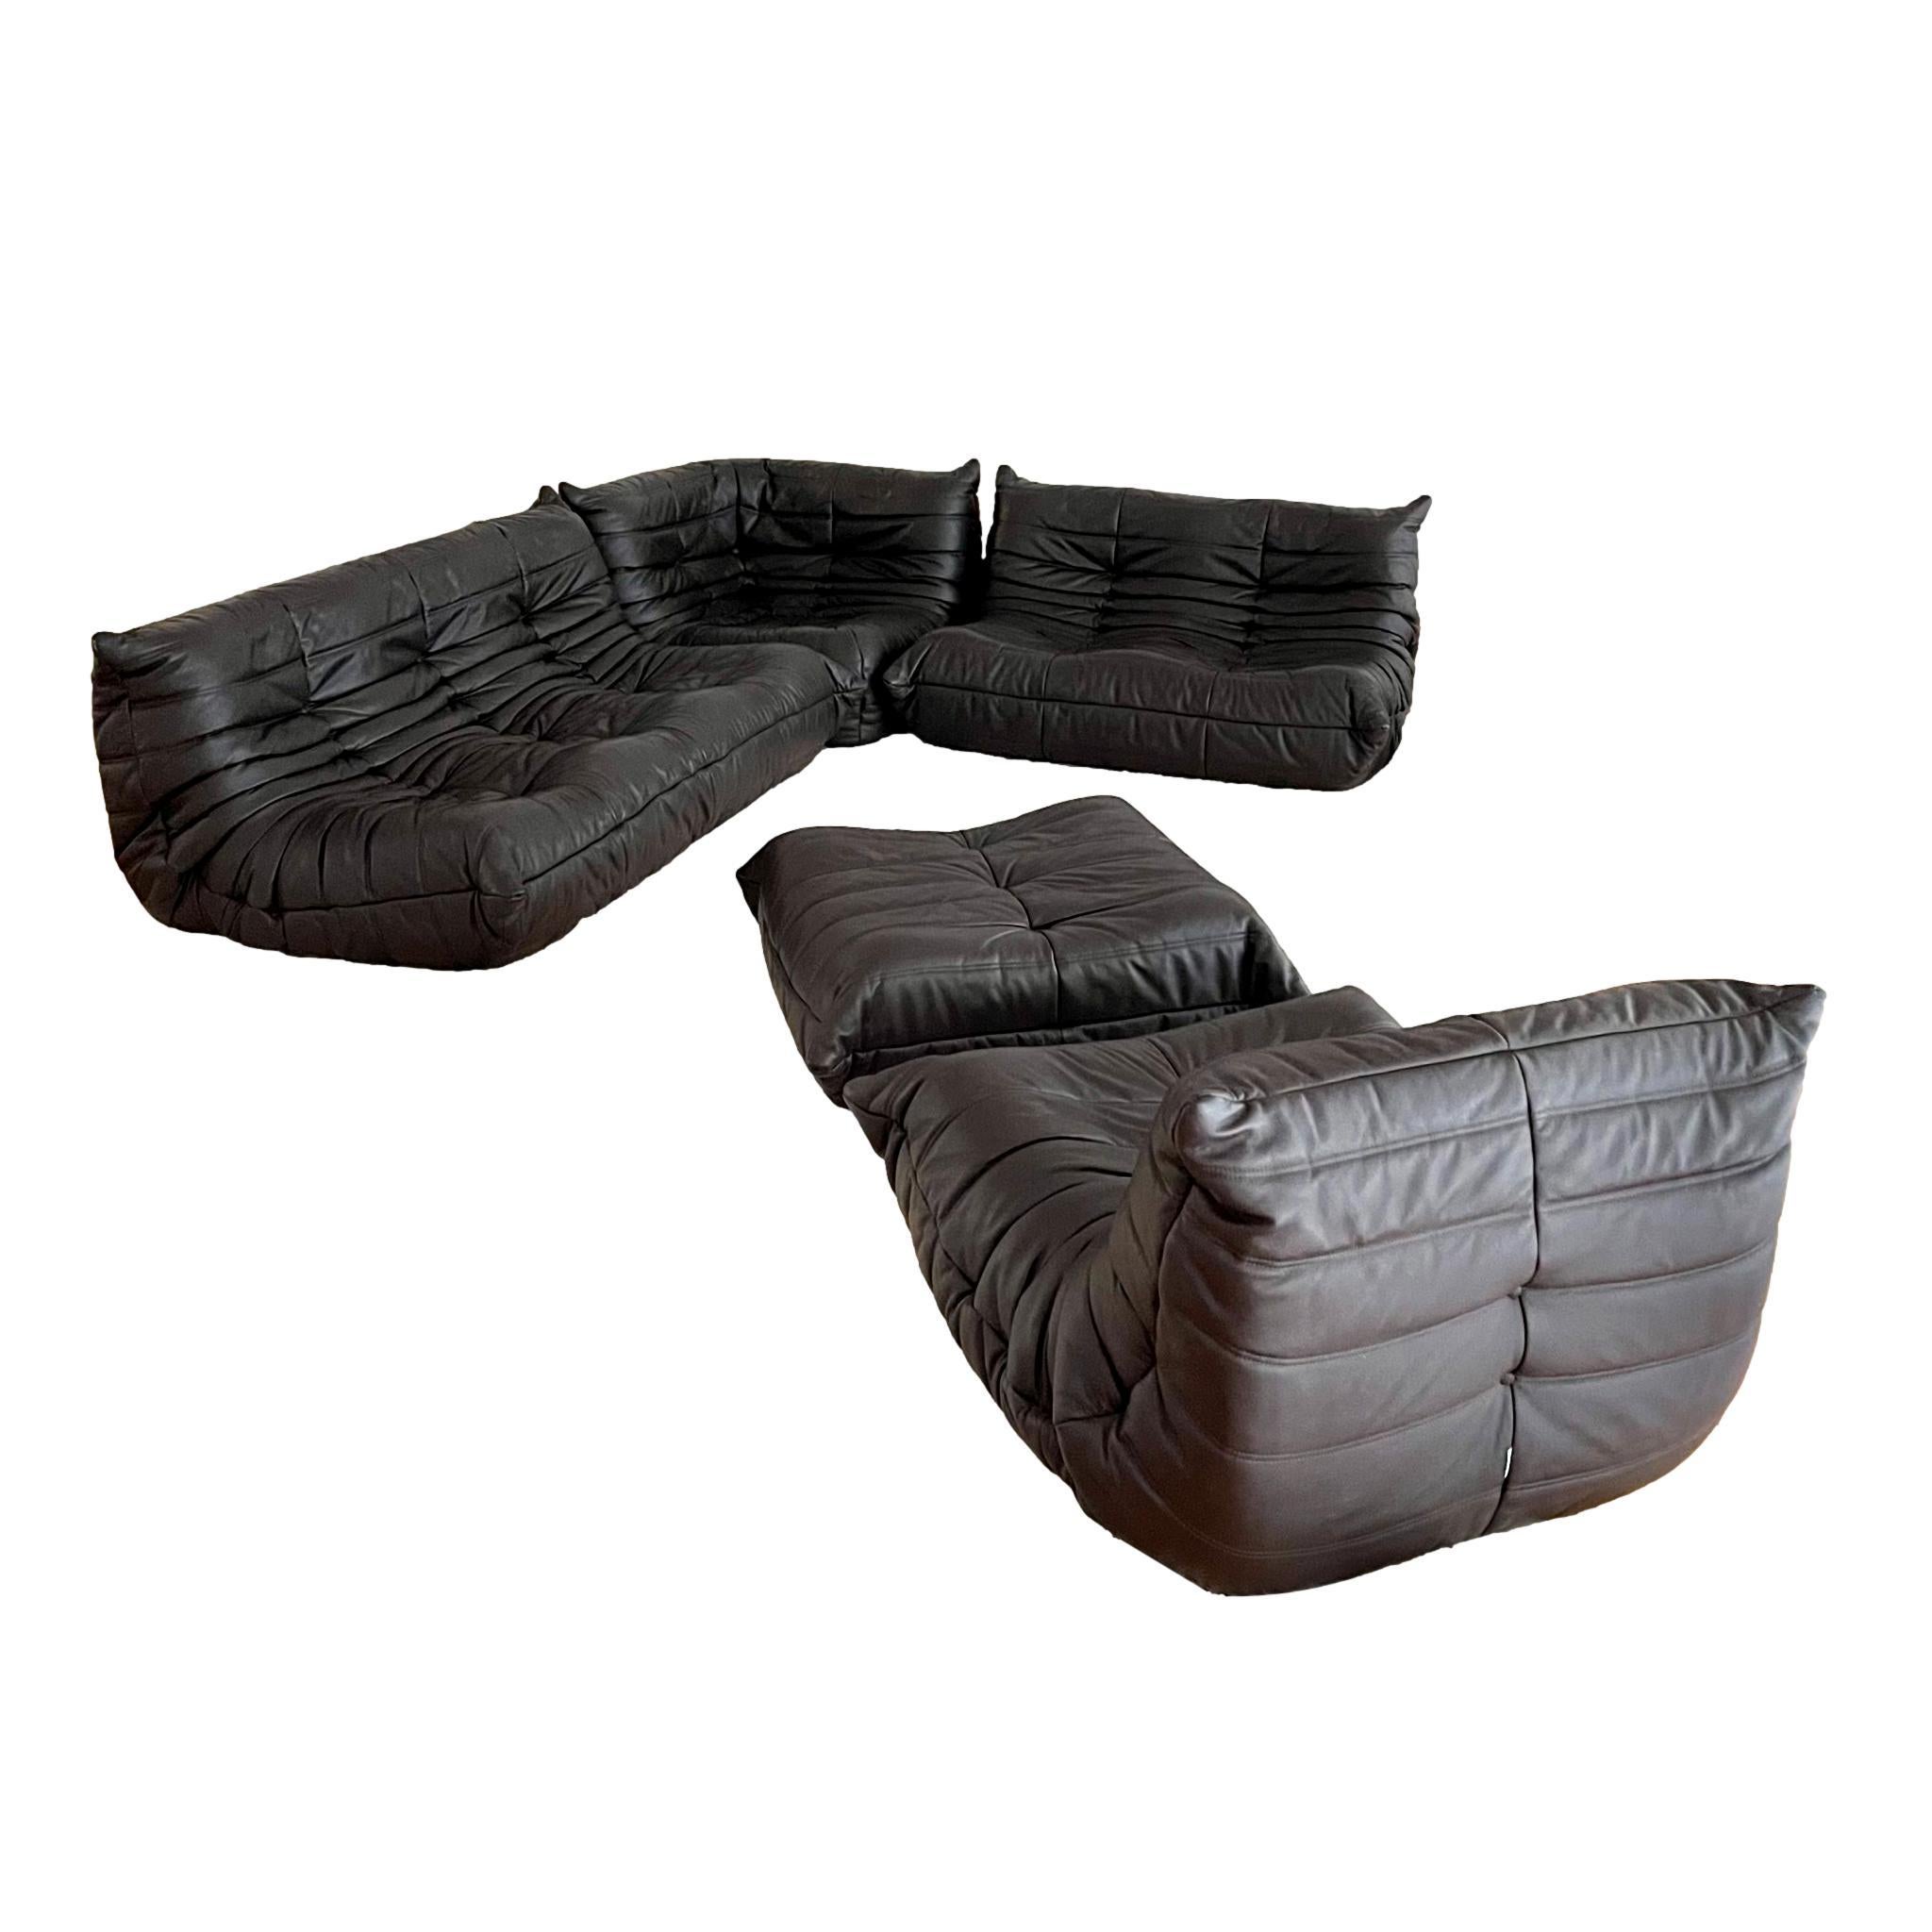 Classic French Togo set by Michel Ducaroy for luxury brand Ligne Roset. Originally designed in the 1970s the iconic togo sofa is now a design classic. This set comes in it's original chocolate brown leather. 

Timeless comfort and style make this